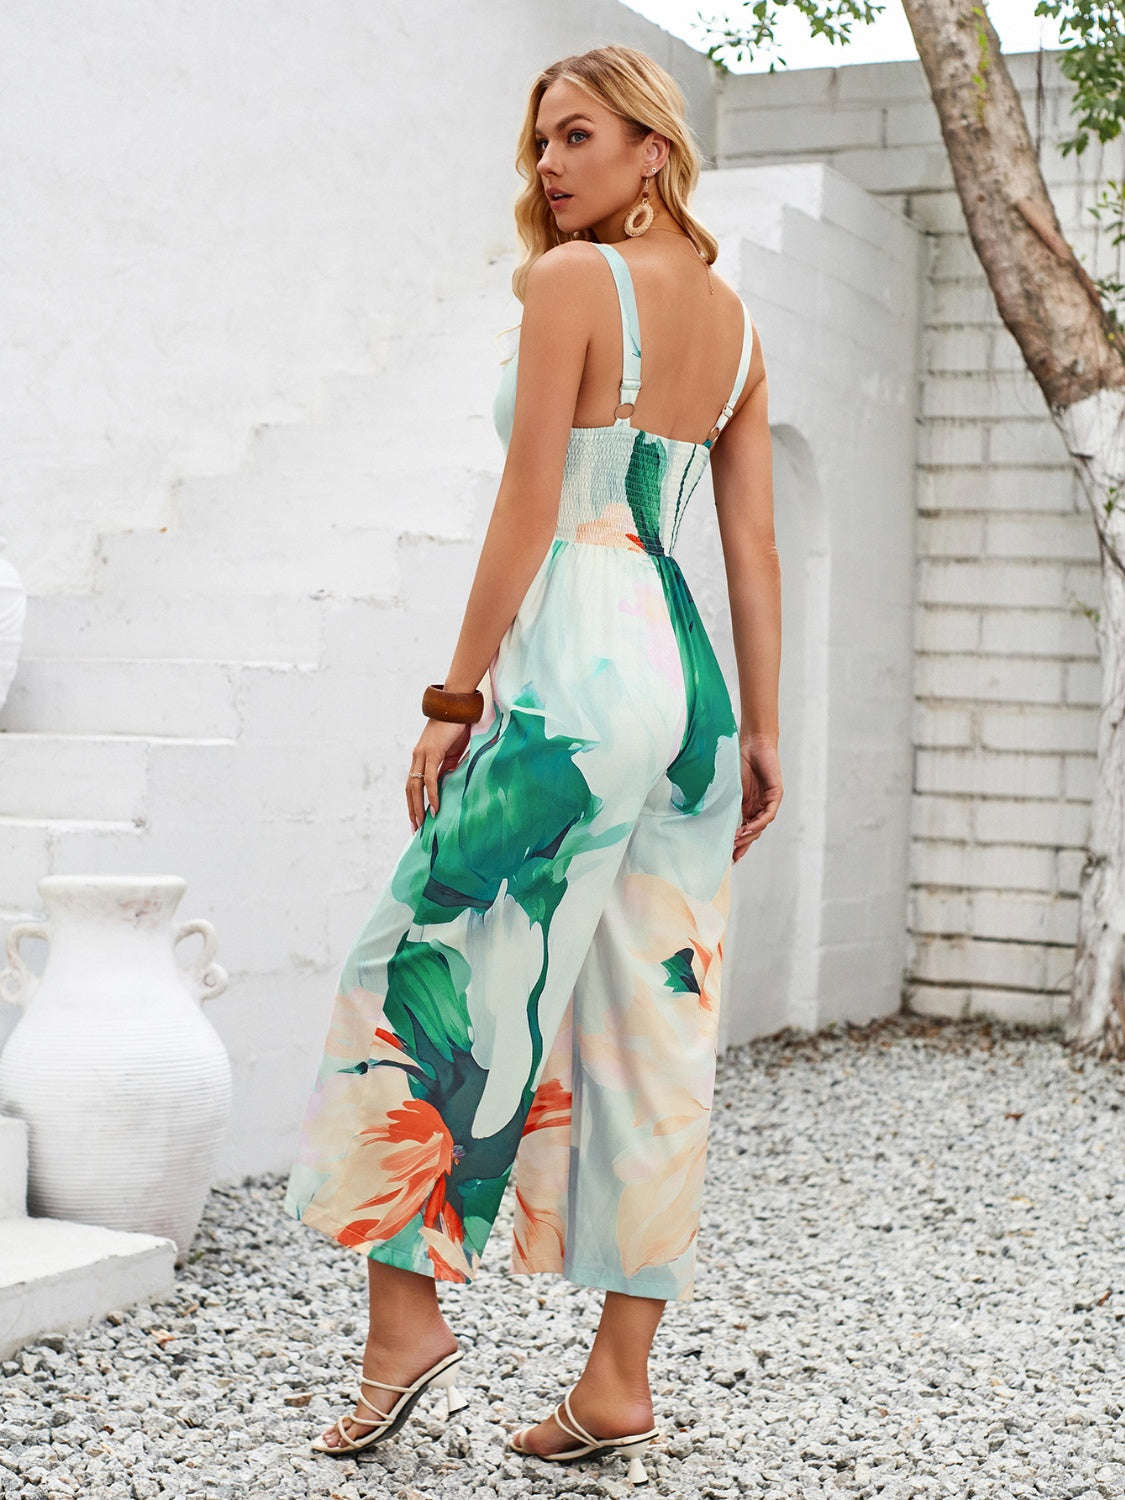 Embrace summer with our Cutout Jumpsuit featuring a vivid print, breezy fabric, and a flattering silhouette for effortless style.